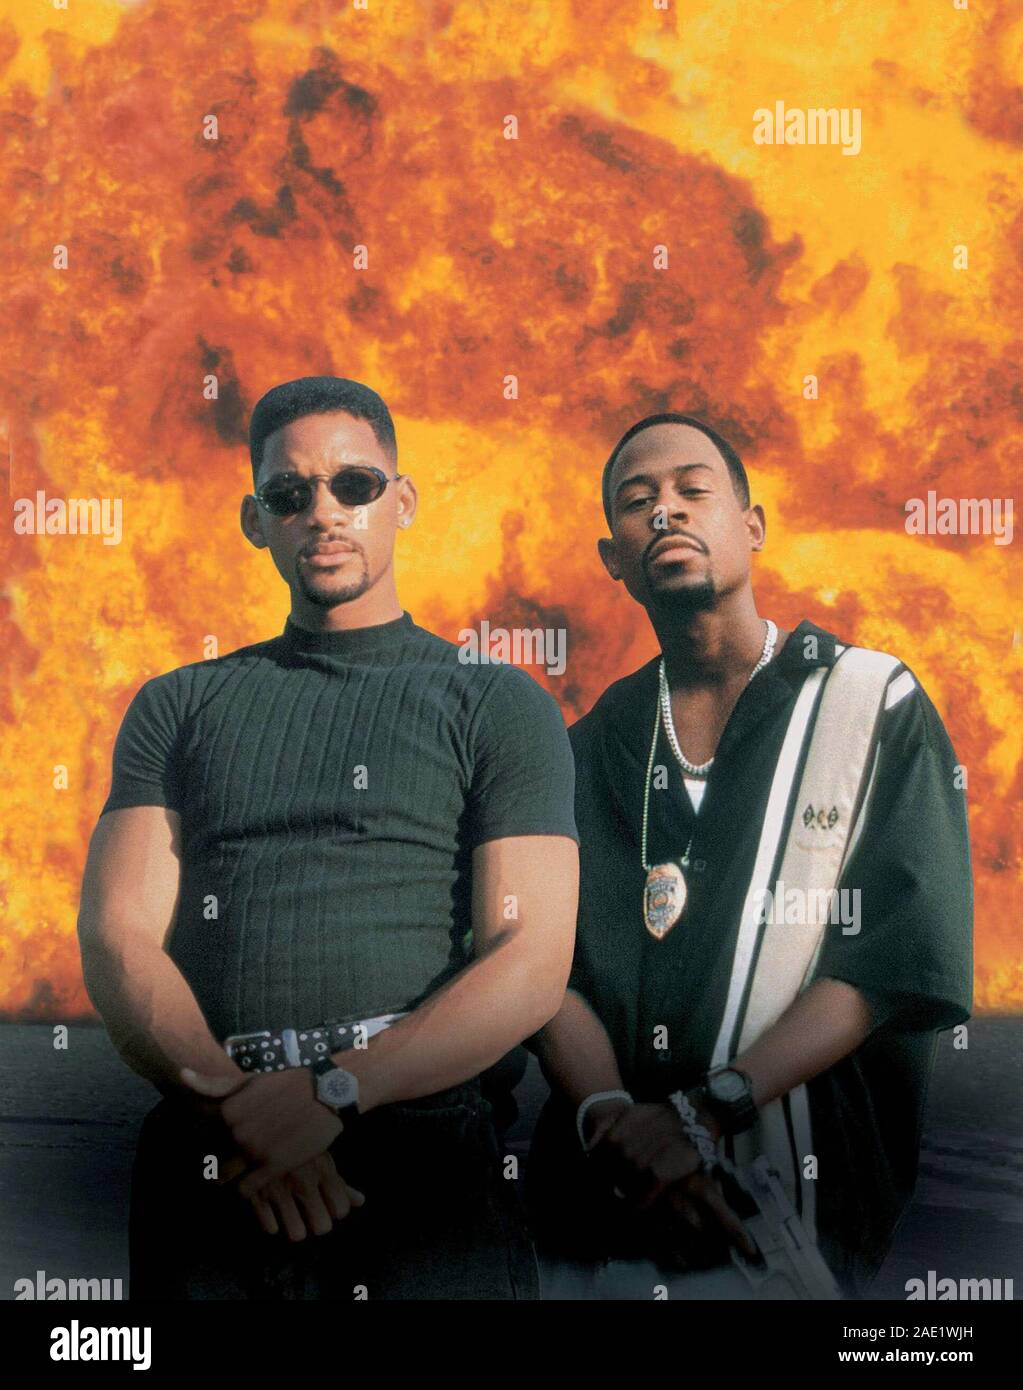 WILL SMITH and MARTIN LAWRENCE in BAD BOYS (1995), directed by MICHAEL BAY. Credit: COLUMBIA PICTURES / Album Stock Photo